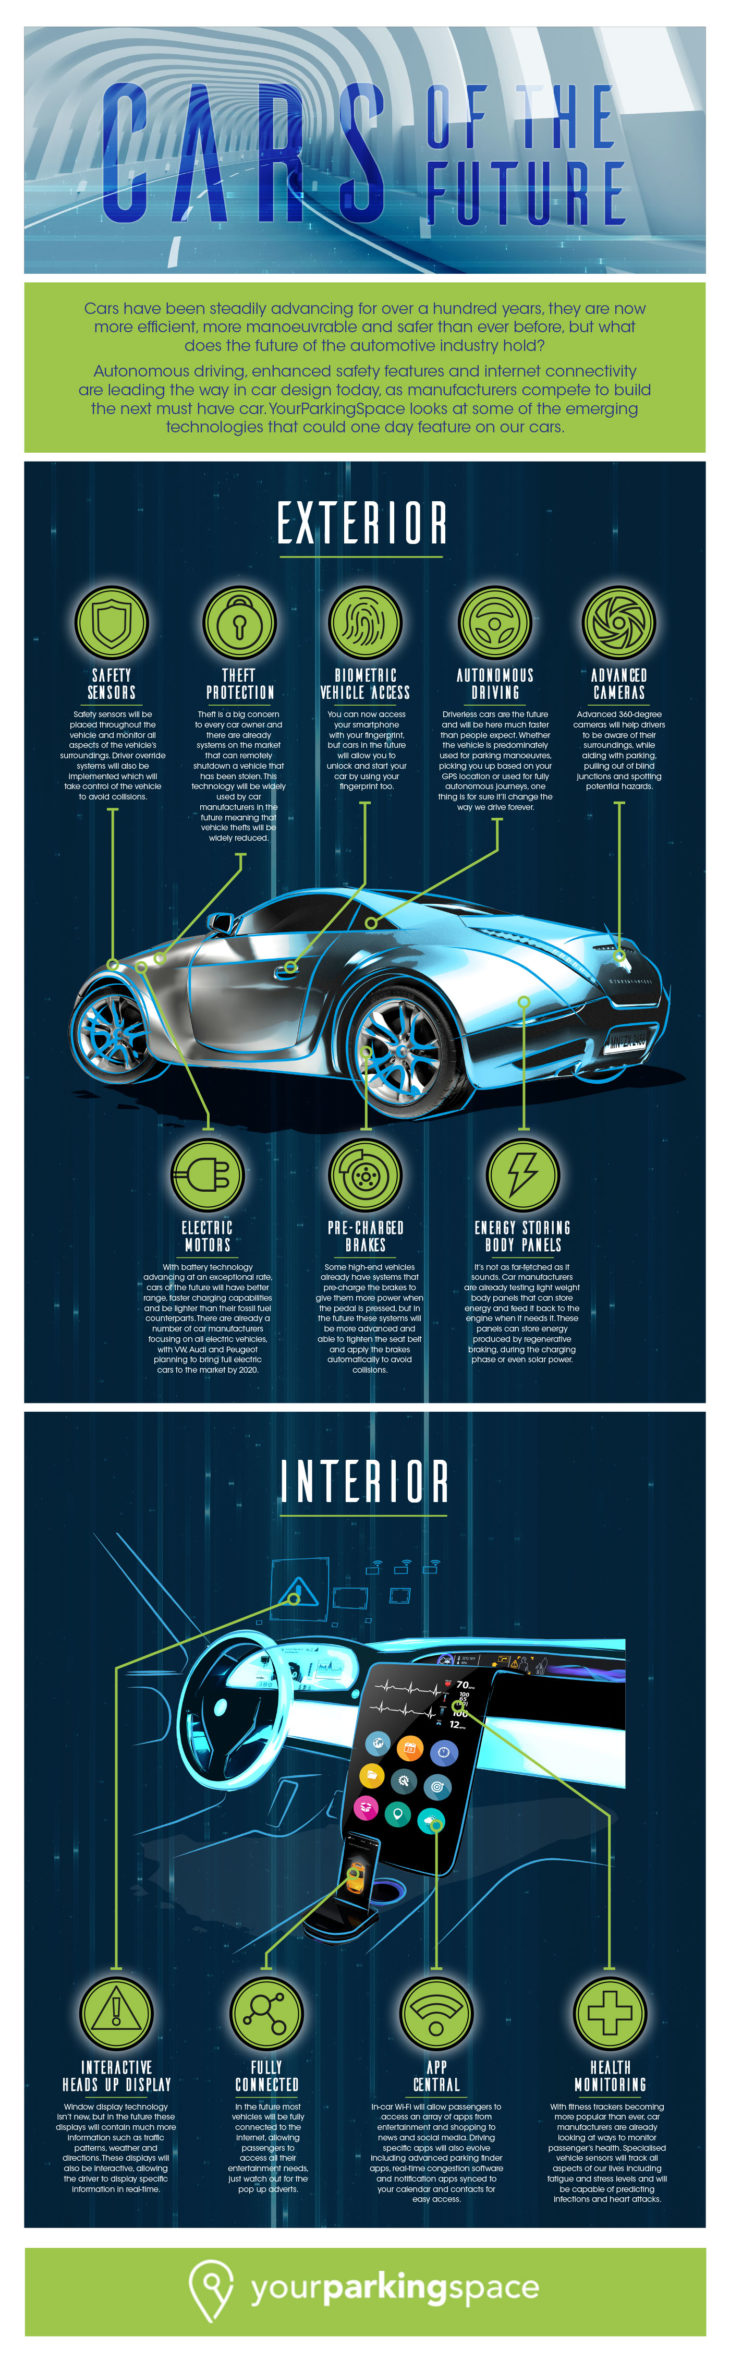 future car infographic 730x2361 at What technology will the cars of the future feature?